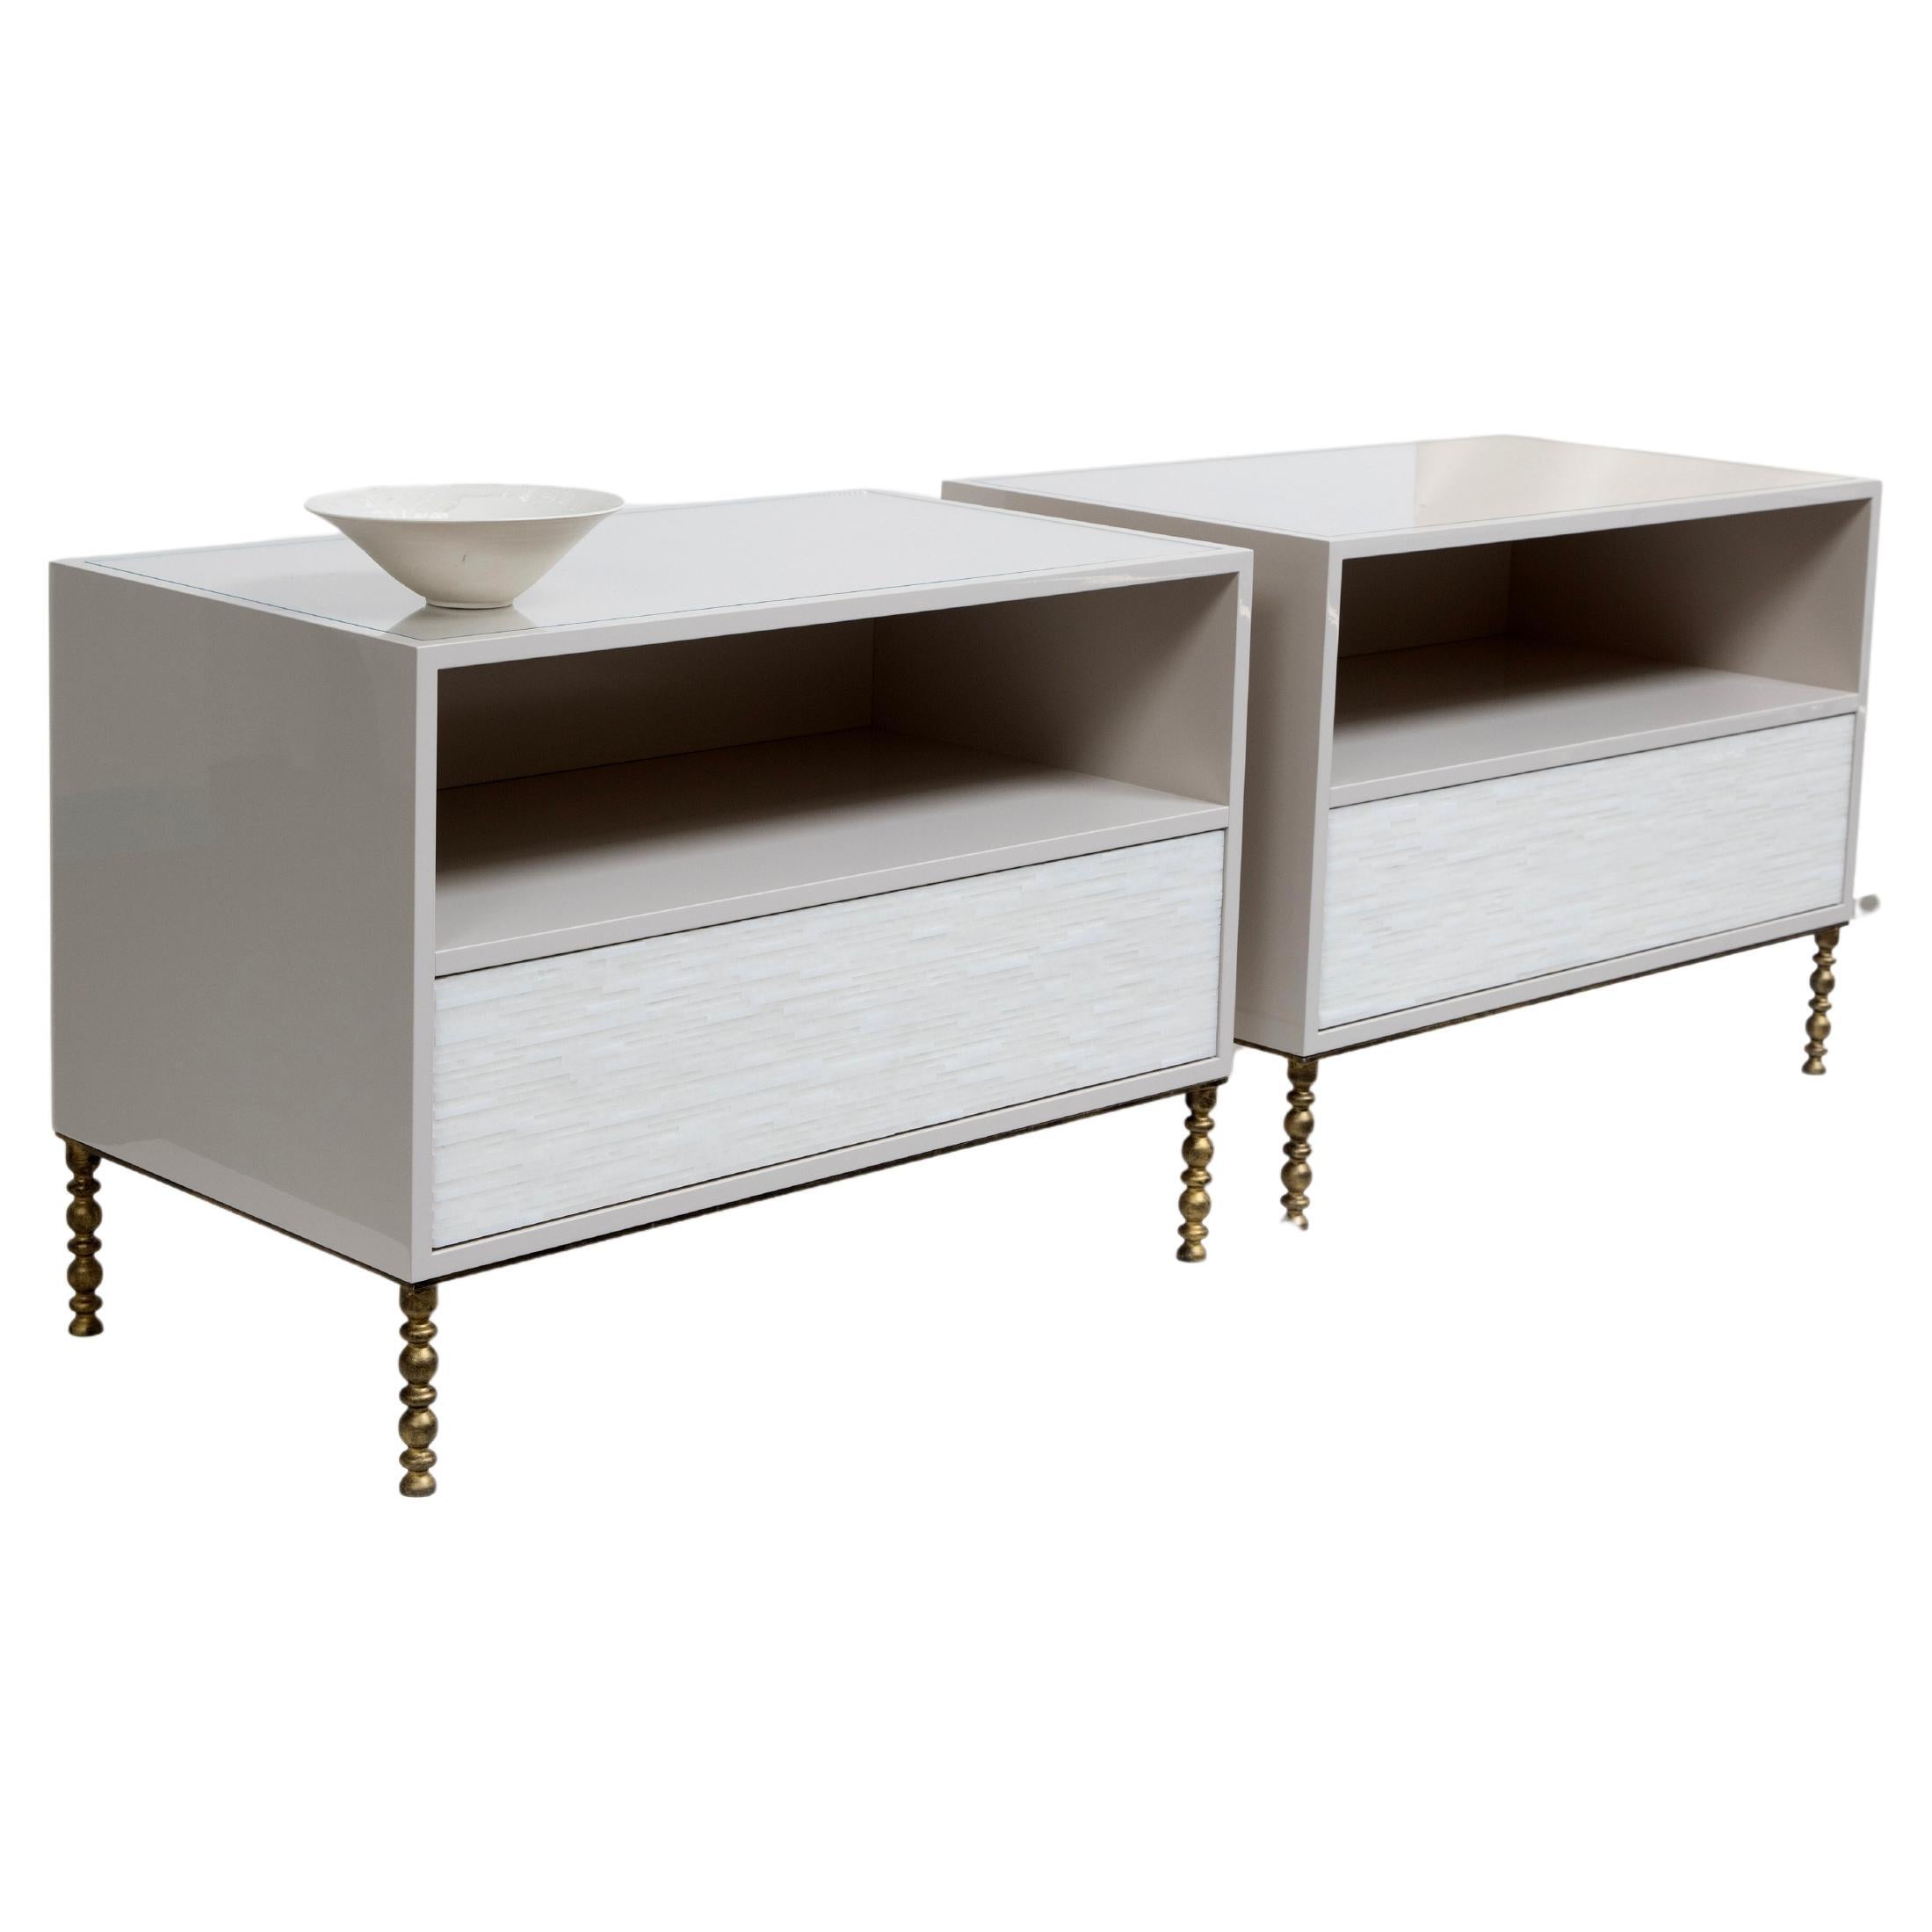 The Modernity One Drawer-One Shelf Glass Nightstands By Ercole  en vente